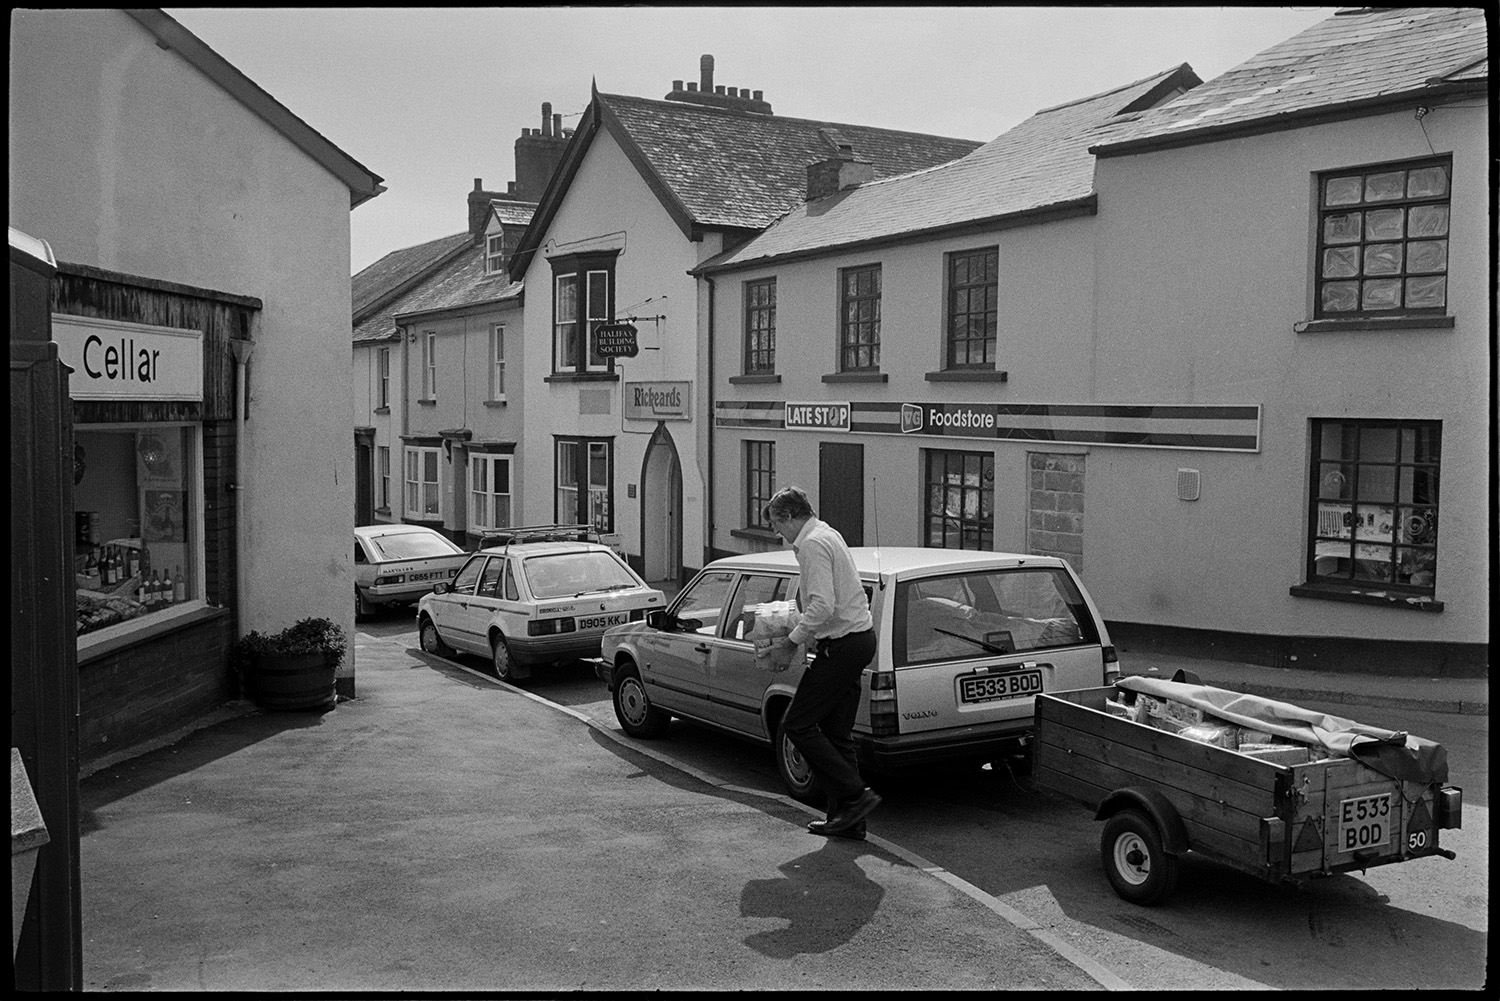 Street scenes with people and cars.
[A man unloading drinks from his parked car and trailer in a street in Chulmleigh. The shop fronts of Late Stop Food store, The dairy Cellar and Rickeards are visible in the background.]